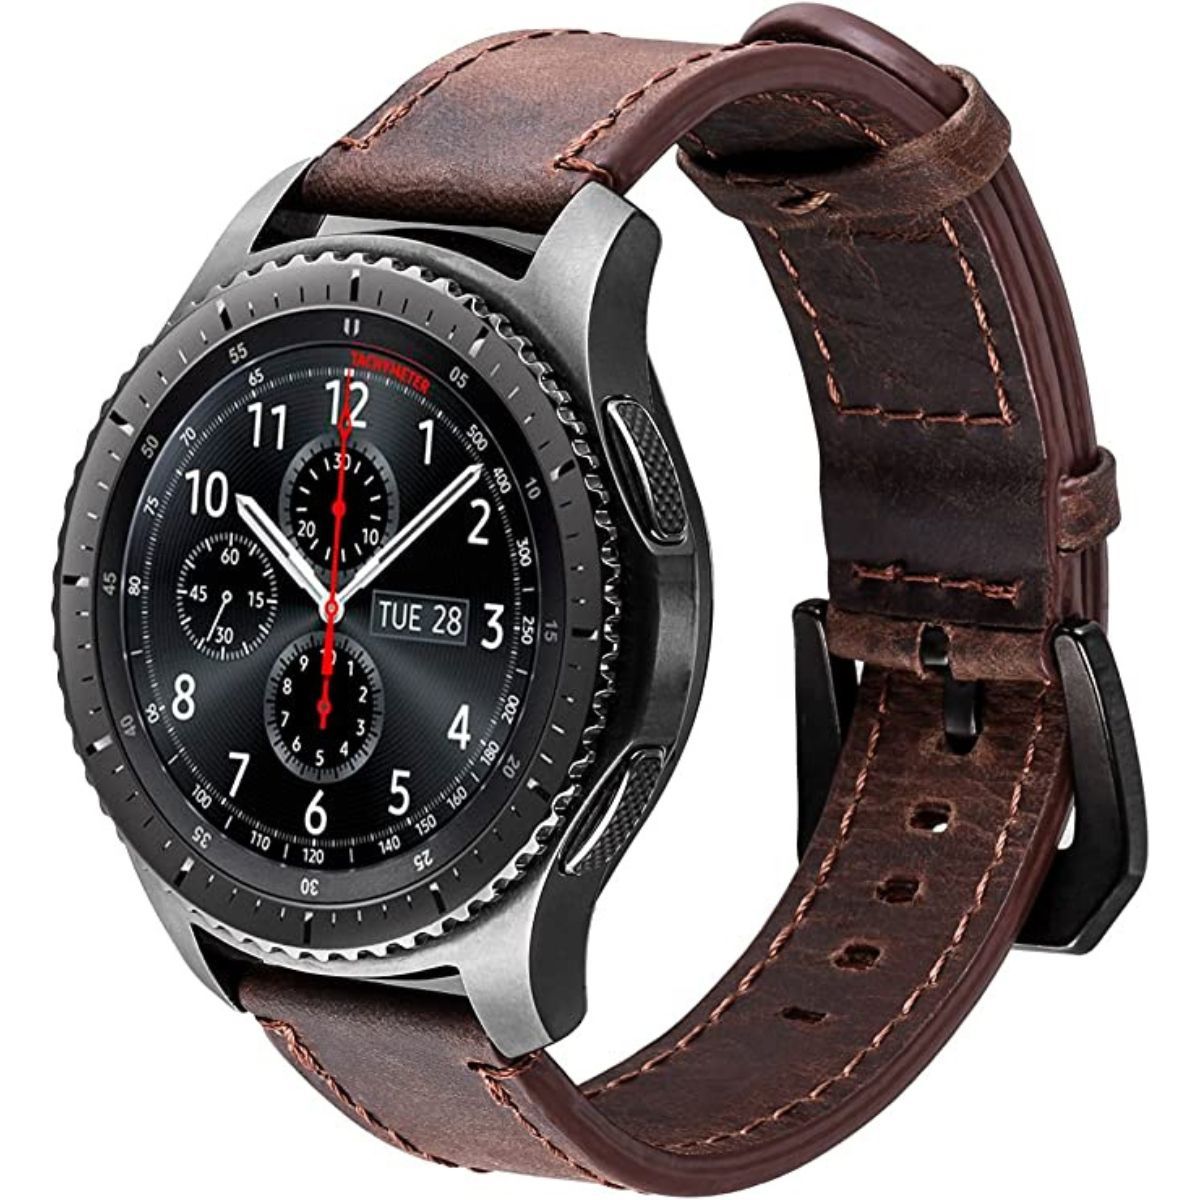 iBasal leather band for Samsung Gear S3